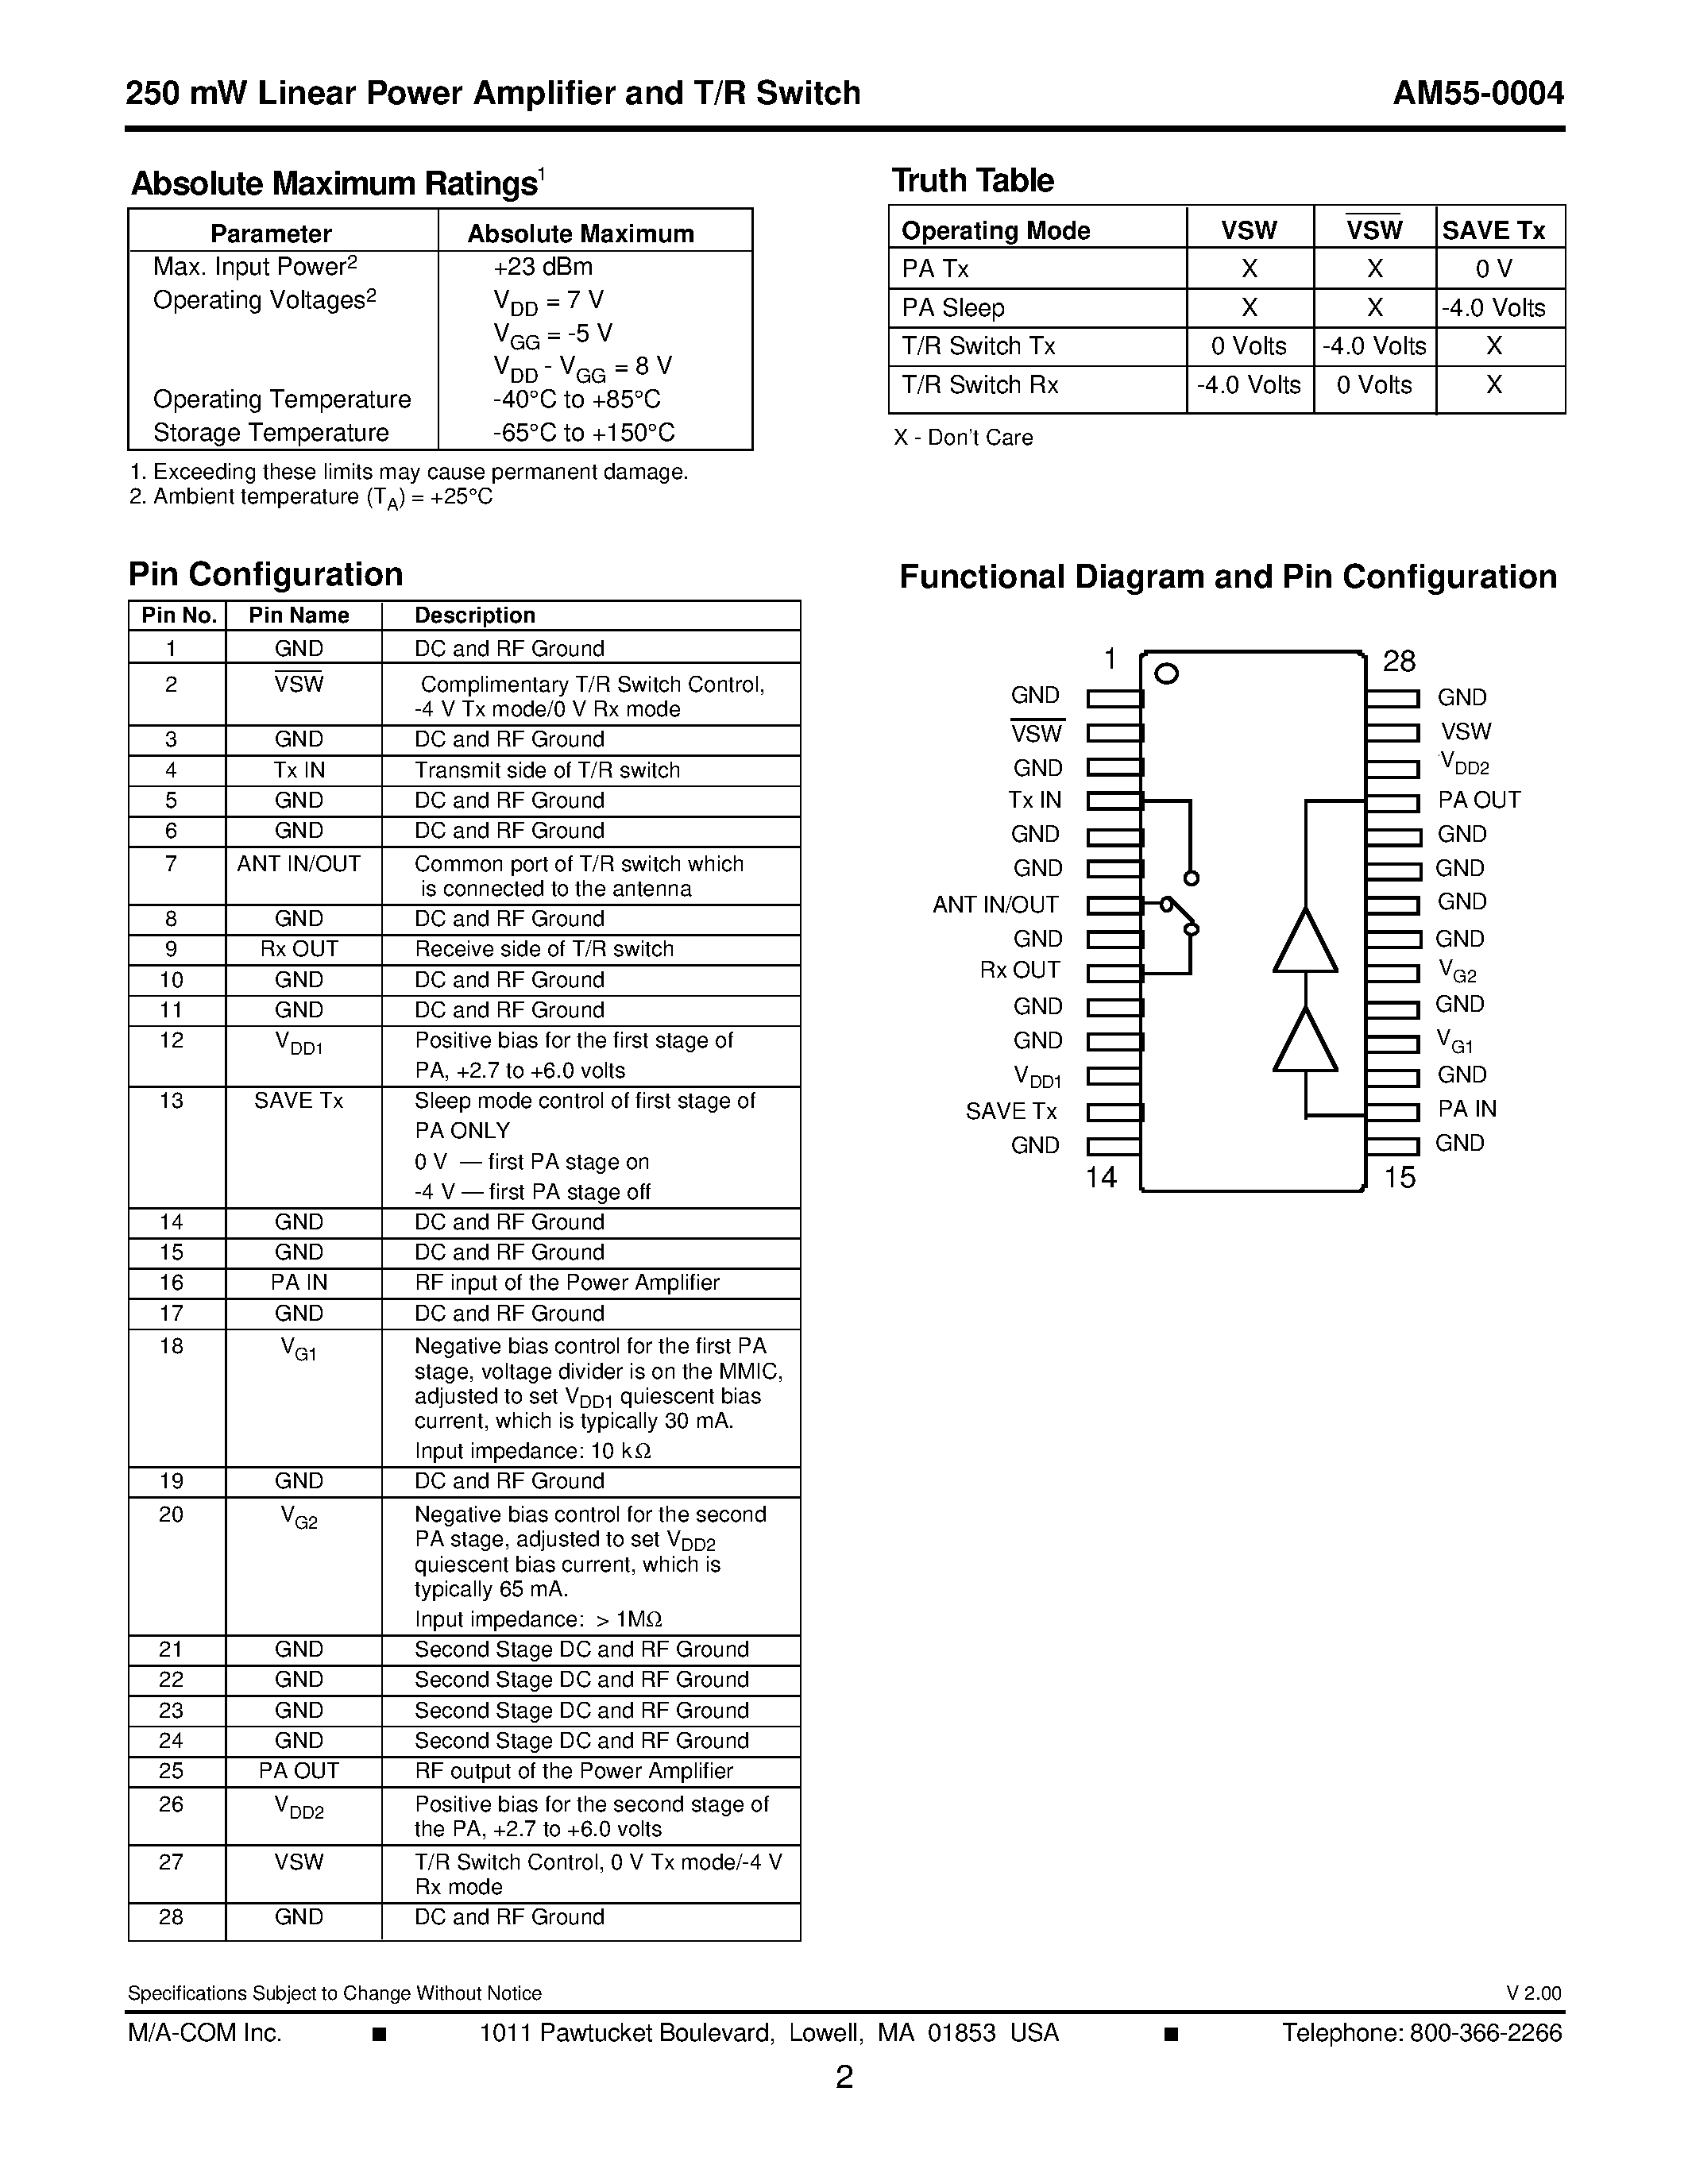 Datasheet AM55-0004SMB - 250 mW Linear Power Amplifier and T/R Switch 1.8 - 2.0 GHz page 2